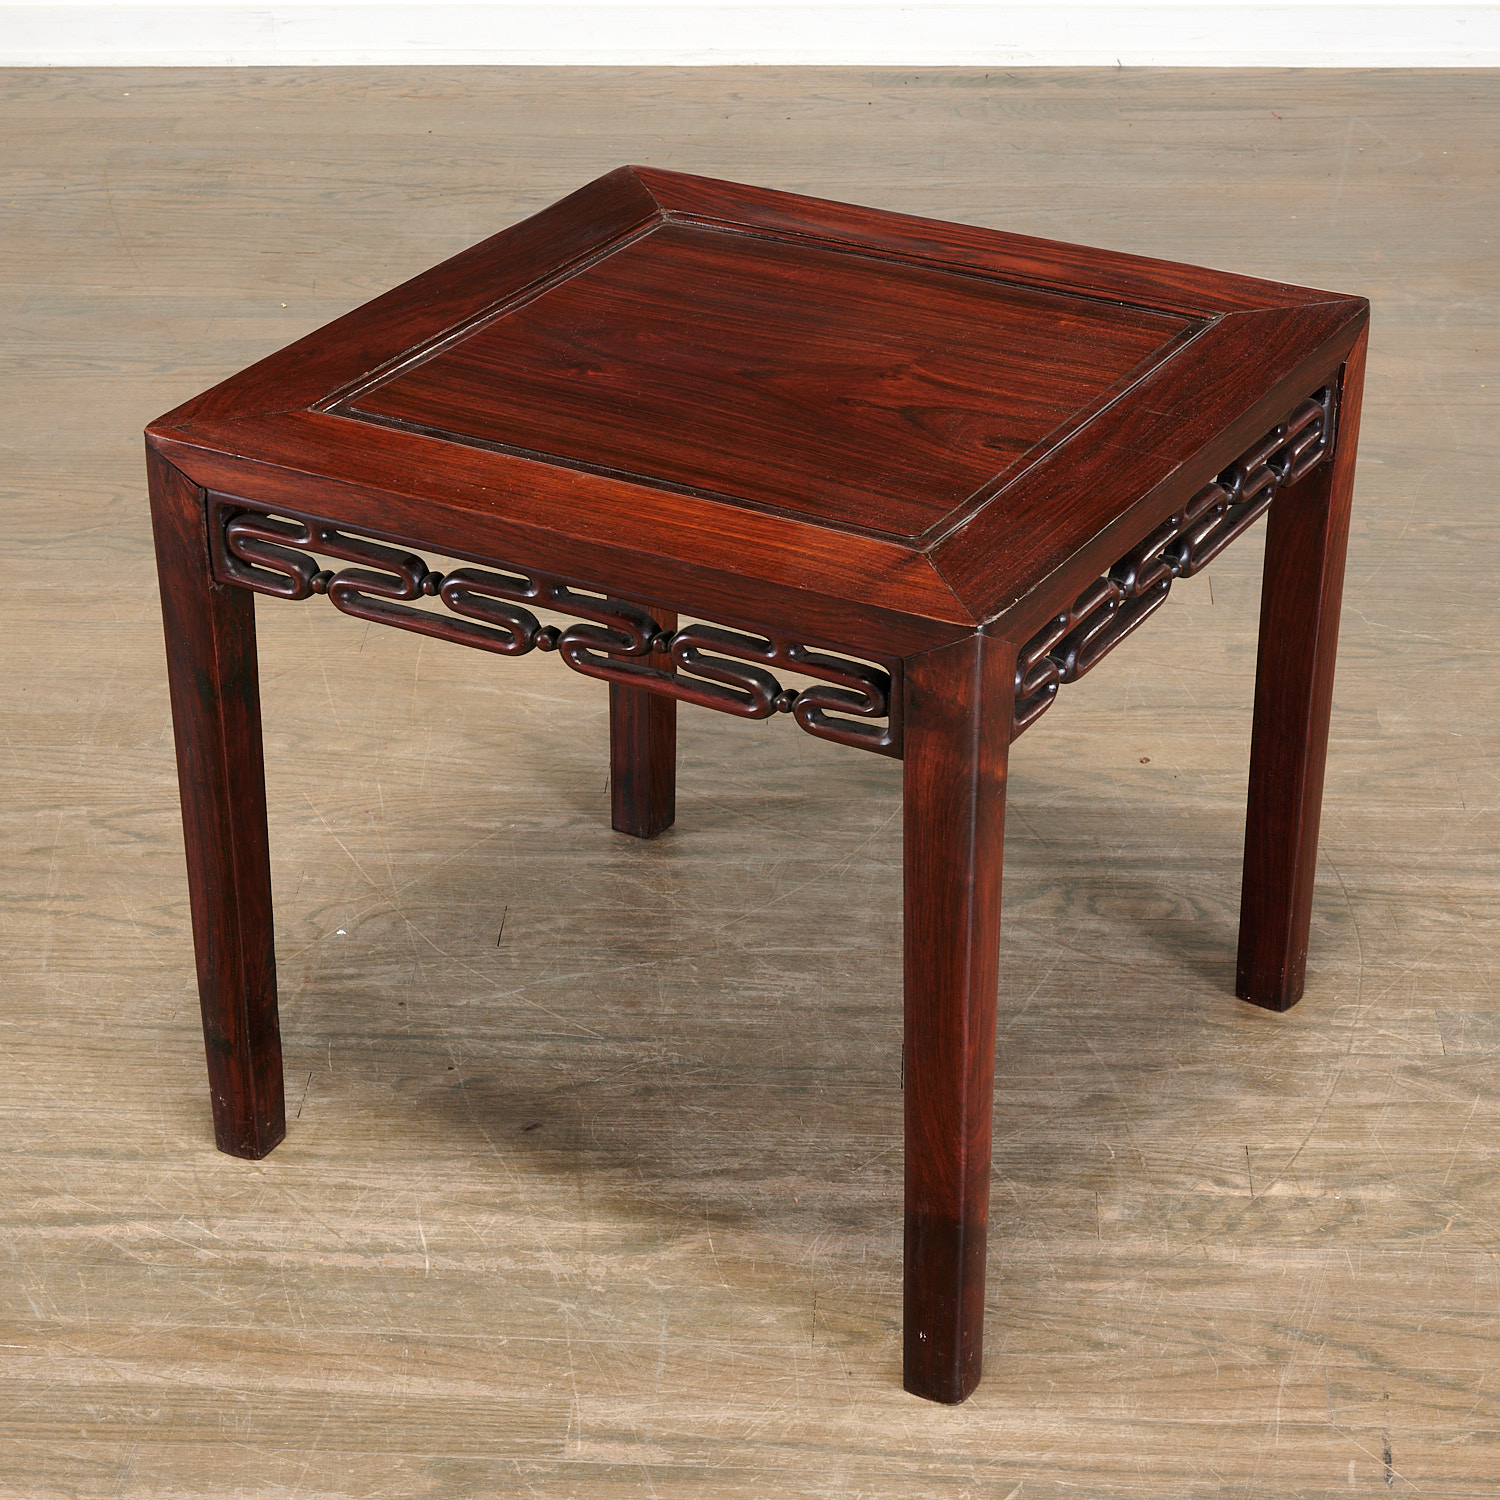 CHINESE CARVED HARDWOOD TABLE Qing